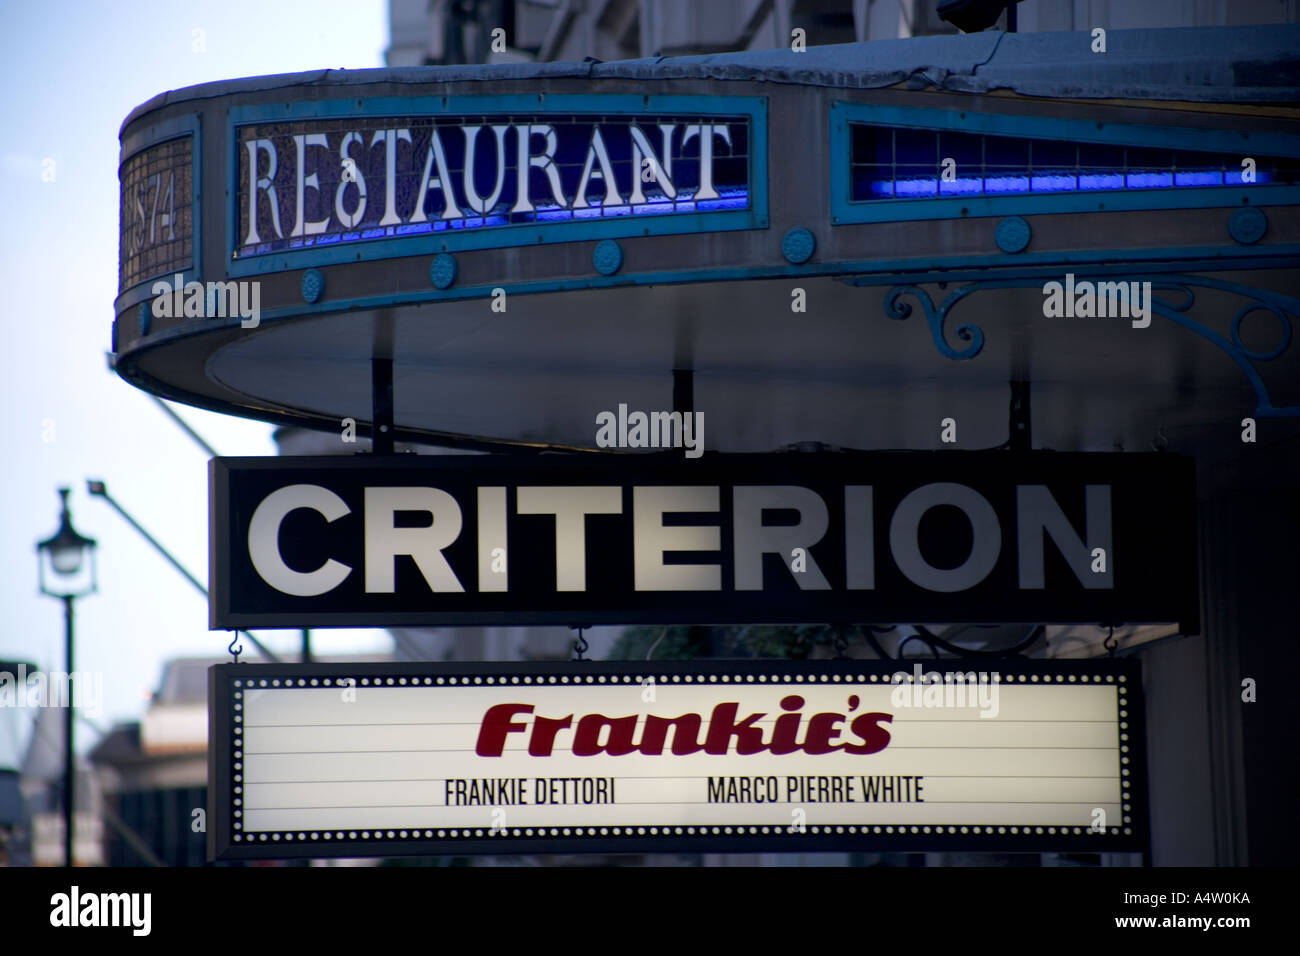 Frankies Criterion Restaurant Piccadilly Circus London England Stock Photo